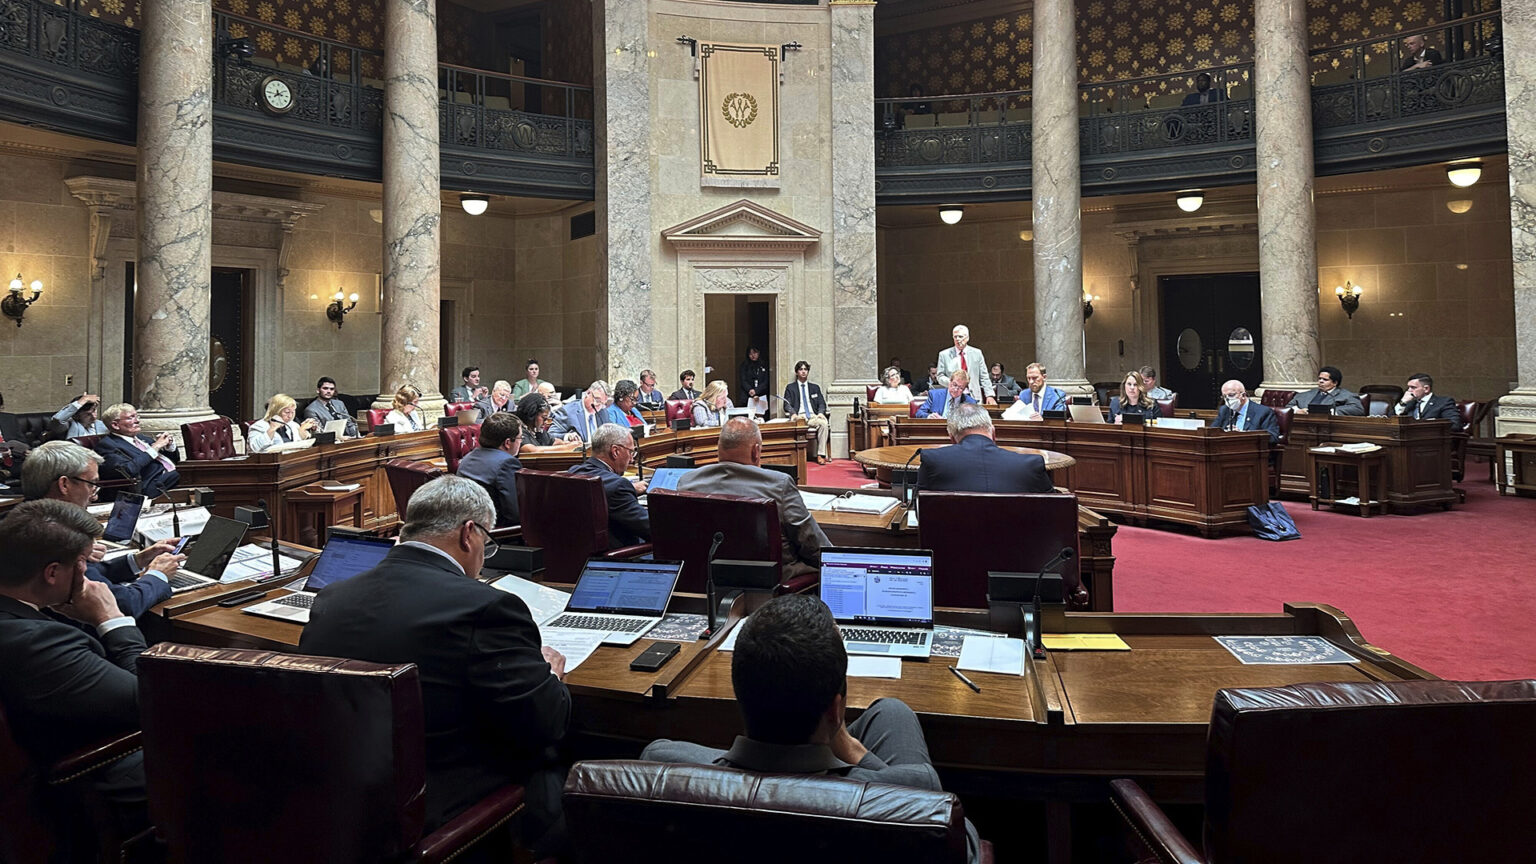 State senators sit at wood desks arranged in a semi-circle and listen to another senator who is standing and speaking, in a room with marble masonry and pillars, and a second-story observation gallery.